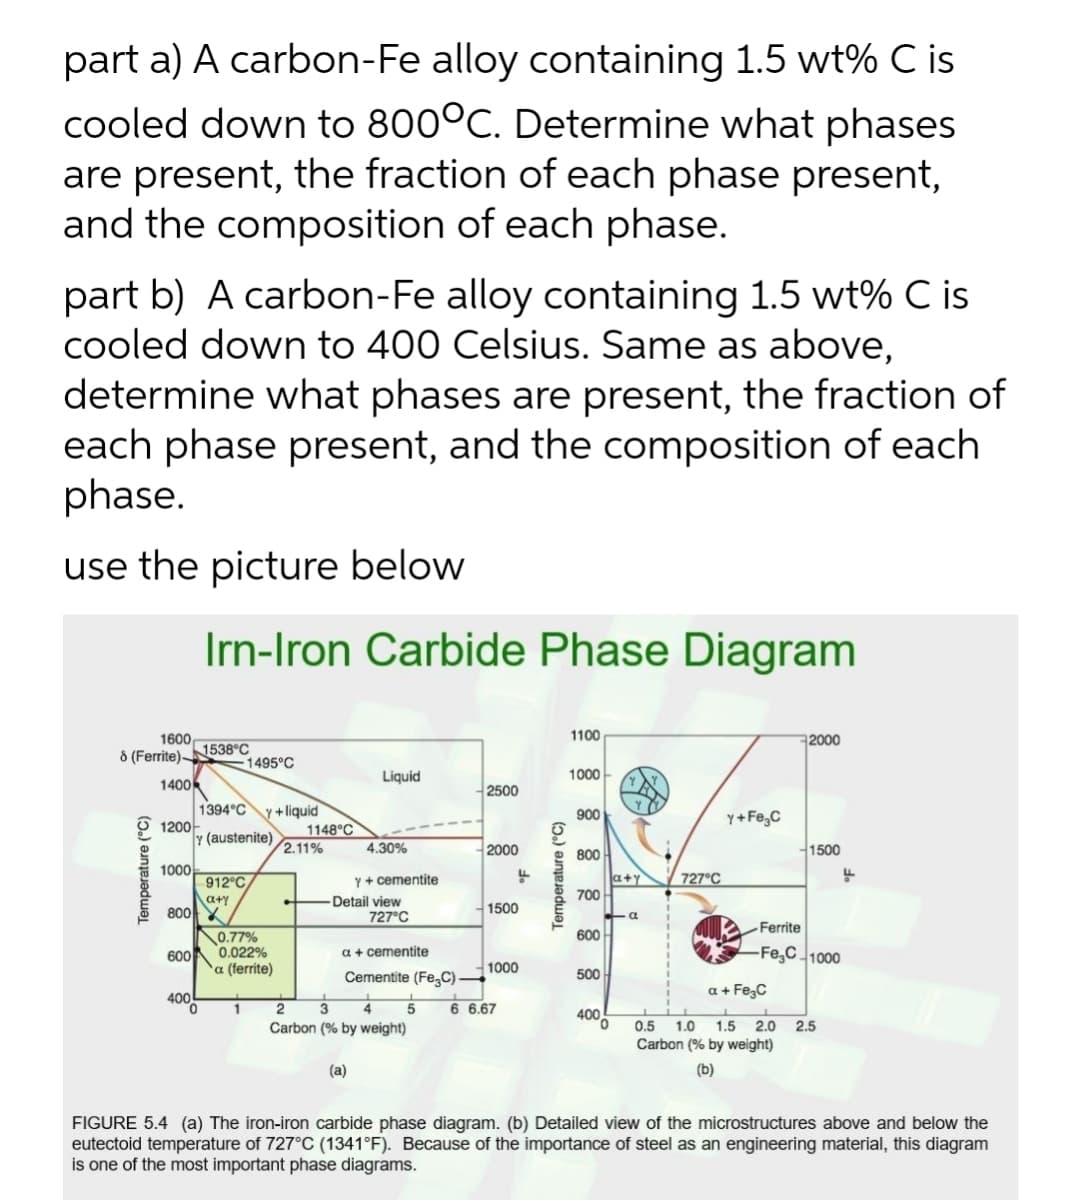 part a) A carbon-Fe alloy containing 1.5 wt% C is
cooled down to 800°C. Determine what phases
are present, the fraction of each phase present,
and the composition of each phase.
part b) A carbon-Fe alloy containing 1.5 wt% C is
cooled down to 400 Celsius. Same as above,
determine what phases are present, the fraction of
each phase present, and the composition of each
phase.
use the picture below
Irn-Iron Carbide Phase Diagram
1600
8 (Ferrite)N538°C
1100
2000
1495°C
Liquid
1000-
1400
1394°C
1200
Y (austenite)
2500
y +liquid
1148°C
2.11%
900
Y+ Fe,C
4.30%
2000
1500
800
1000
Y+ cementite
Detail view
727°C
a+y
700
912°C
727°C
a+y
80에
0.77%
0.022%
1500
Ferrite
600
600
a + cementite
-Fe,C 1000
α (errte)
1000
Cementite (FeC) -
500
400
a + Fe,C
1
Carbon (% by weight)
6 6.67
0.5
1.0
Carbon (% by weight)
1.5
2.0
2.5
(a)
(b)
FIGURE 5.4 (a) The iron-iron carbide phase diagram. (b) Detailed view of the microstructures above and below the
eutectoid temperature of 727°C (1341°F). Because of the importance of steel as an engineering material, this diagram
is one of the most important phase diagrams.
Temperature (°C)
Temperature (°C)
